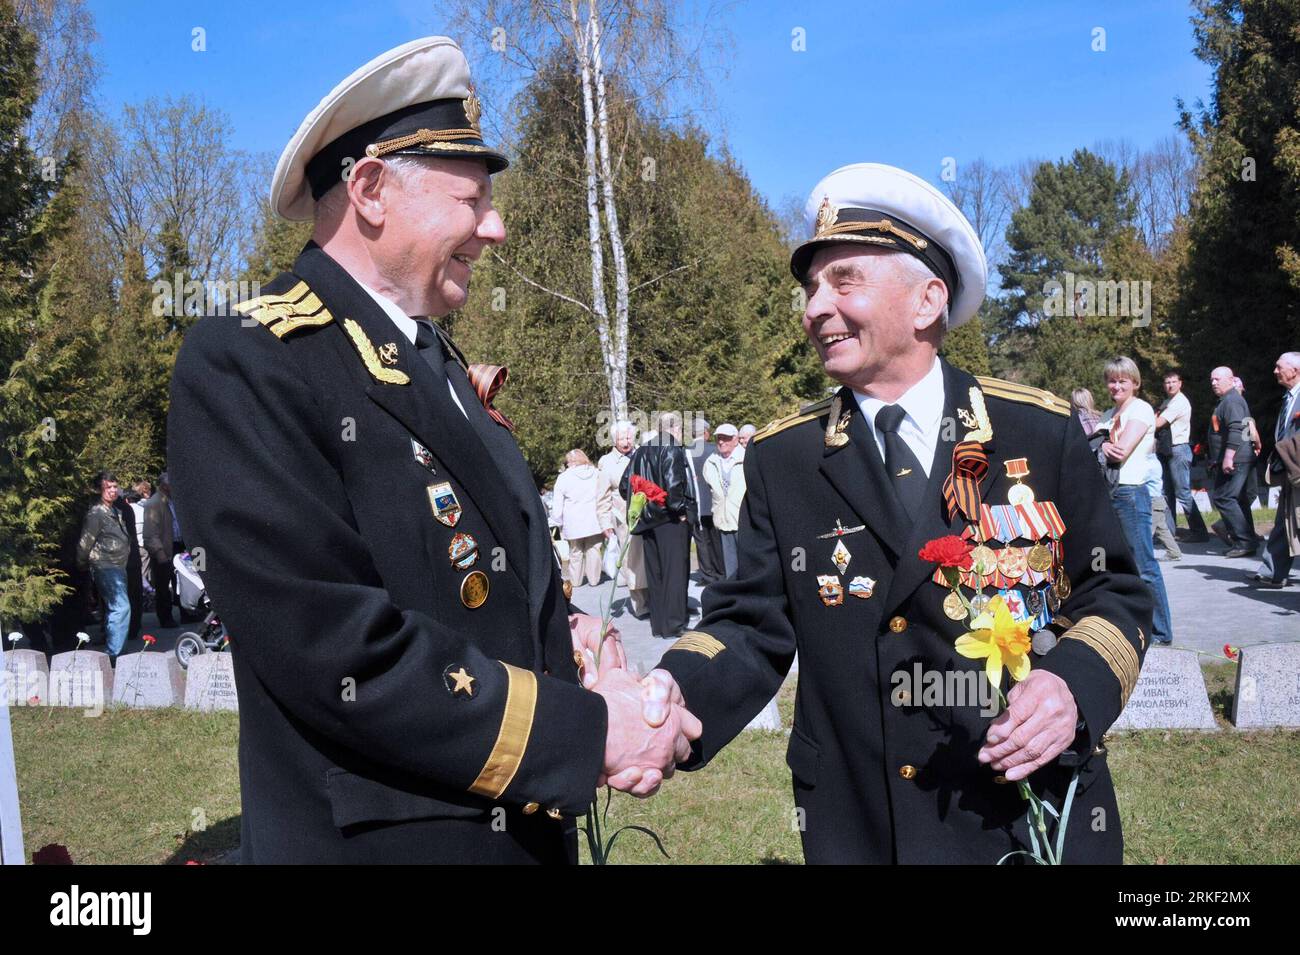 Bildnummer: 55331576  Datum: 09.05.2011  Copyright: imago/Xinhua (110509) -- TALLINN, May 9, 2011 (Xinhua) -- Two veterans shake hands while laying flowers to the Bronze Soldier monument in the Defense Forces Cemetery in Tallinn, capital of Estonia, May 9, 2011. More than 200 World War II veterans and locals paid tributes to the Bronze Soldier monument here on Monday to mark the 66th anniversary of the victory over the Nazi Germany. (Xinhua/Victor) ESTONIA-TALLINN-VICTORY DAY-CELEBRATION PUBLICATIONxNOTxINxCHN Gesellschaft Gedenken Jahrestag Zweiter Weltkrieg Ende Kriegsende kbdig xsk 2011 que Stock Photo